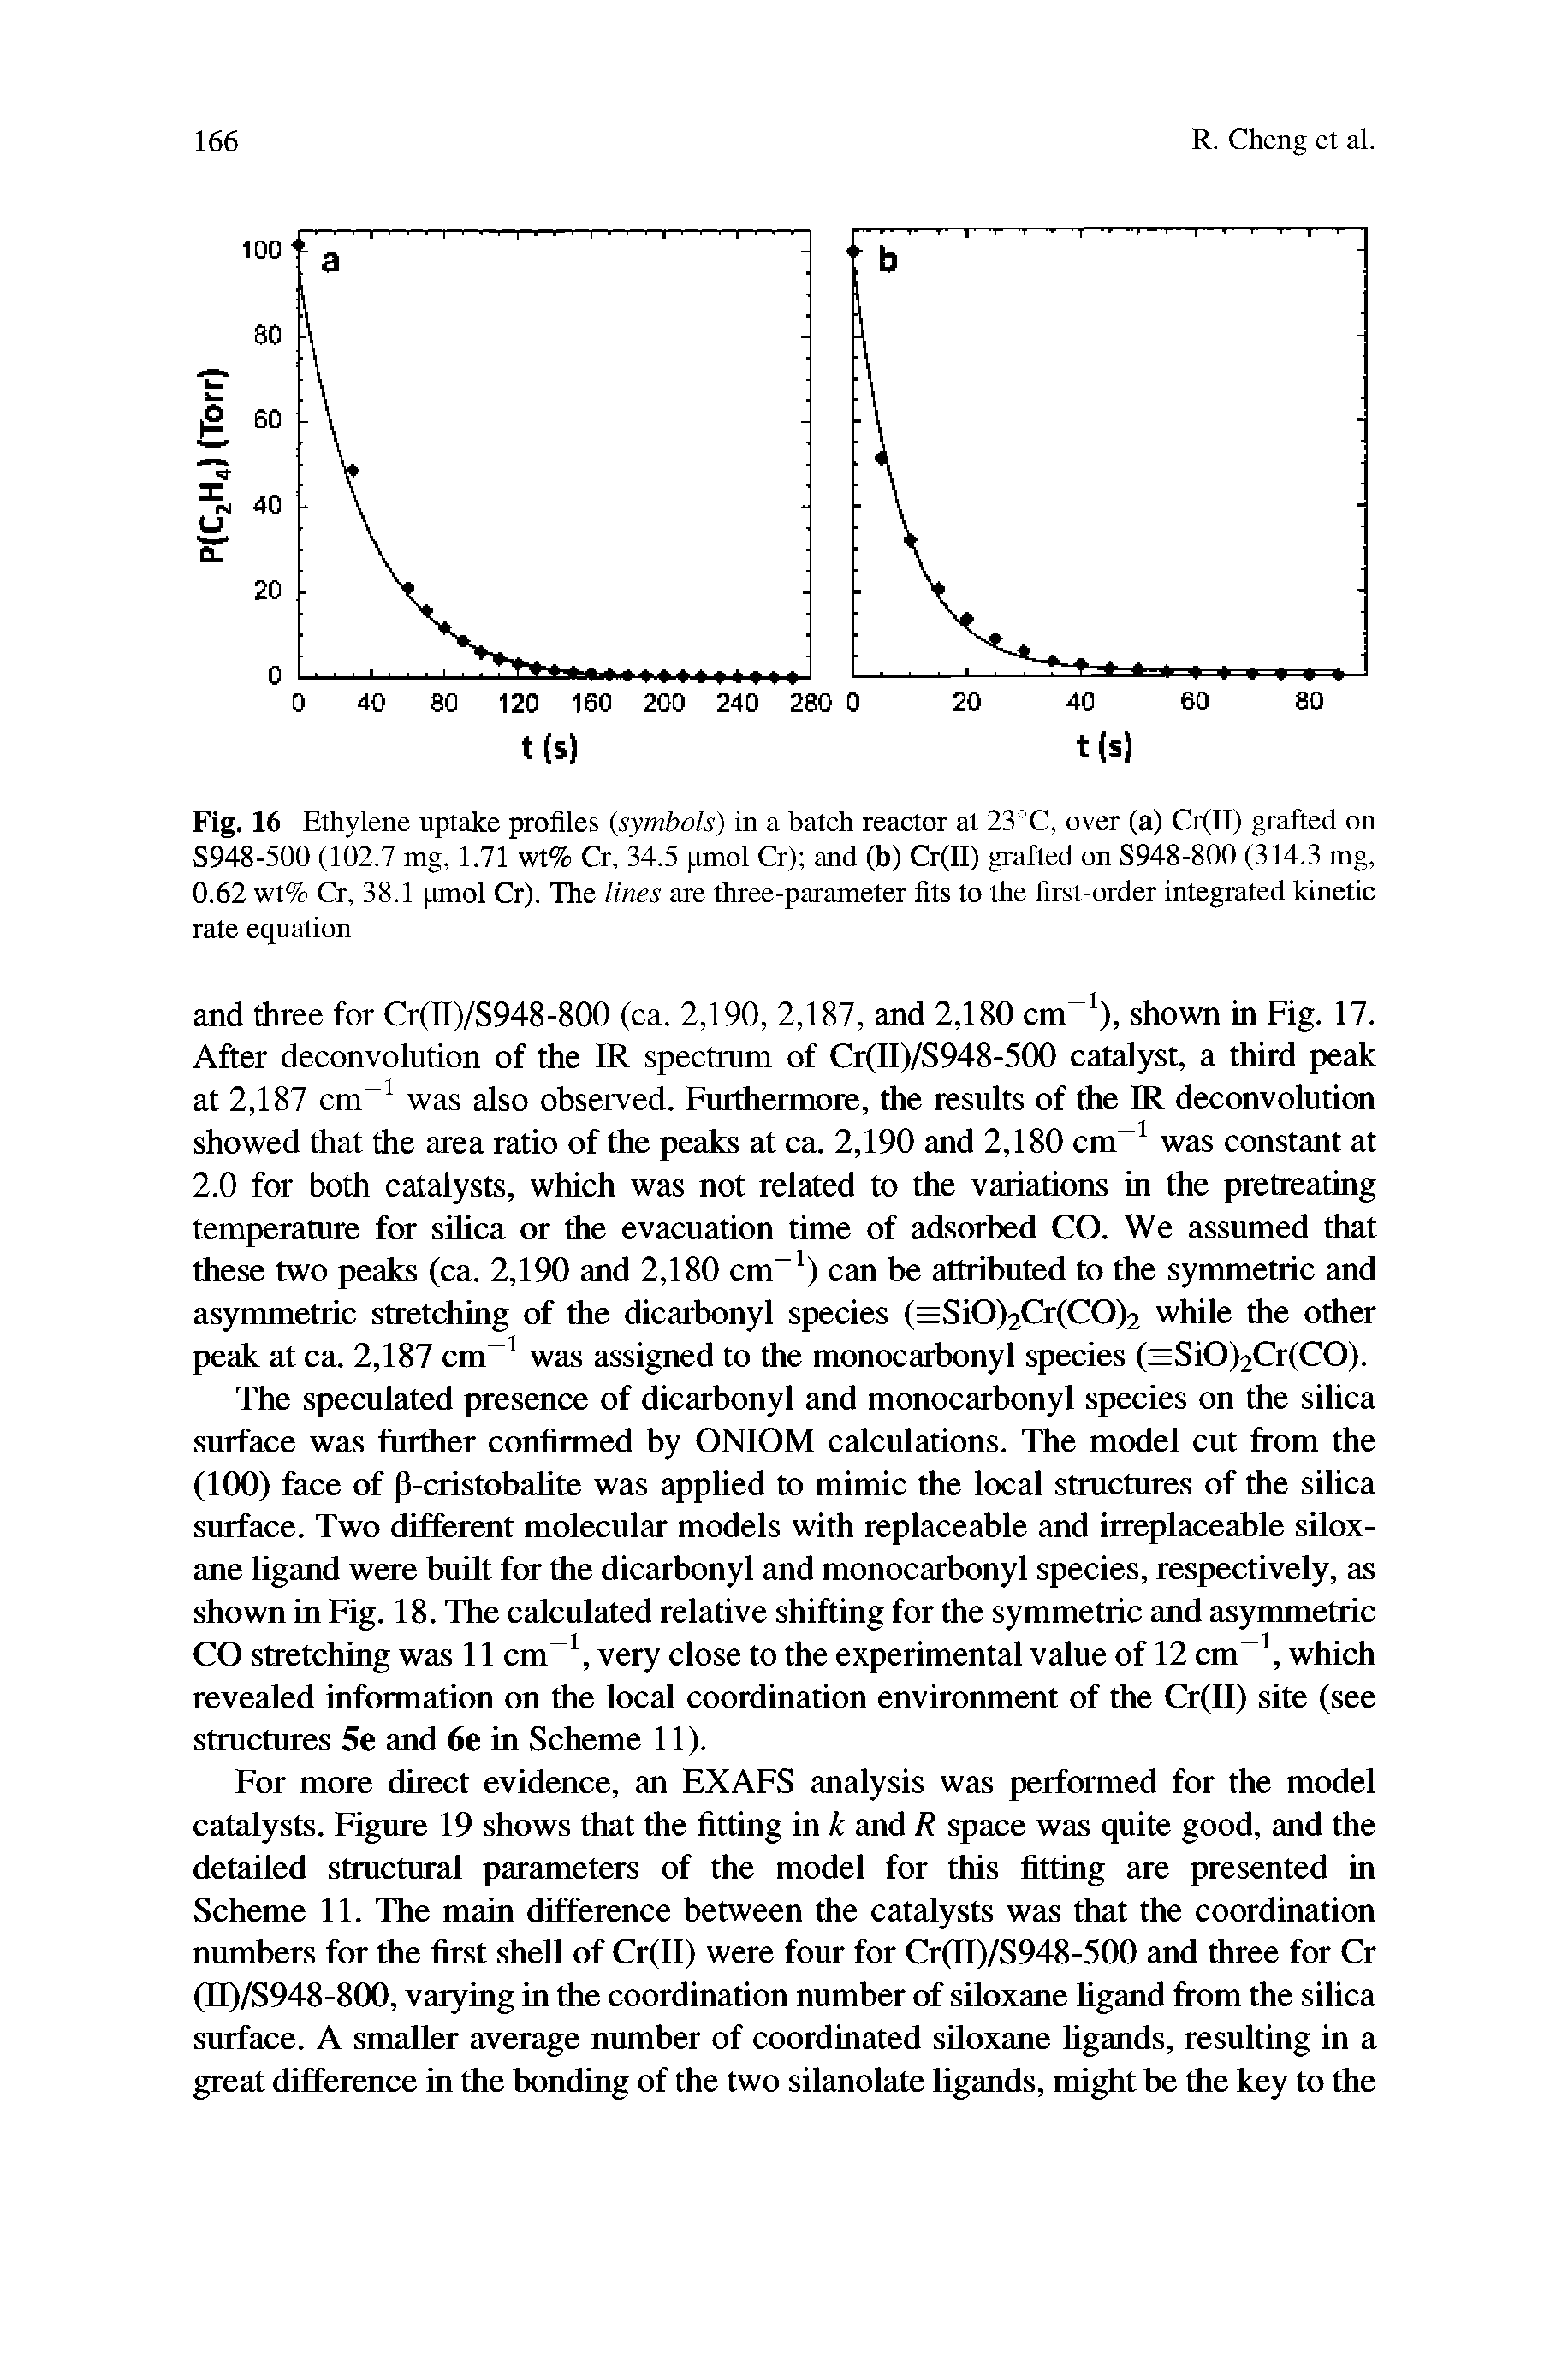 Fig. 16 Ethylene uptake profiles symbols) in a batch reactor at 23°C, over (a) Cr(II) grafted on S948-500 (102.7 mg, 1.71 wt% Cr, 34.5 pmol Cr) and (b) Cr(II) grafted on S948-800 (314.3 mg, 0.62 wt% Cr, 38.1 pmol Cr). The lines are three-parameter fits to the first-order integrated kinetic rate equation...